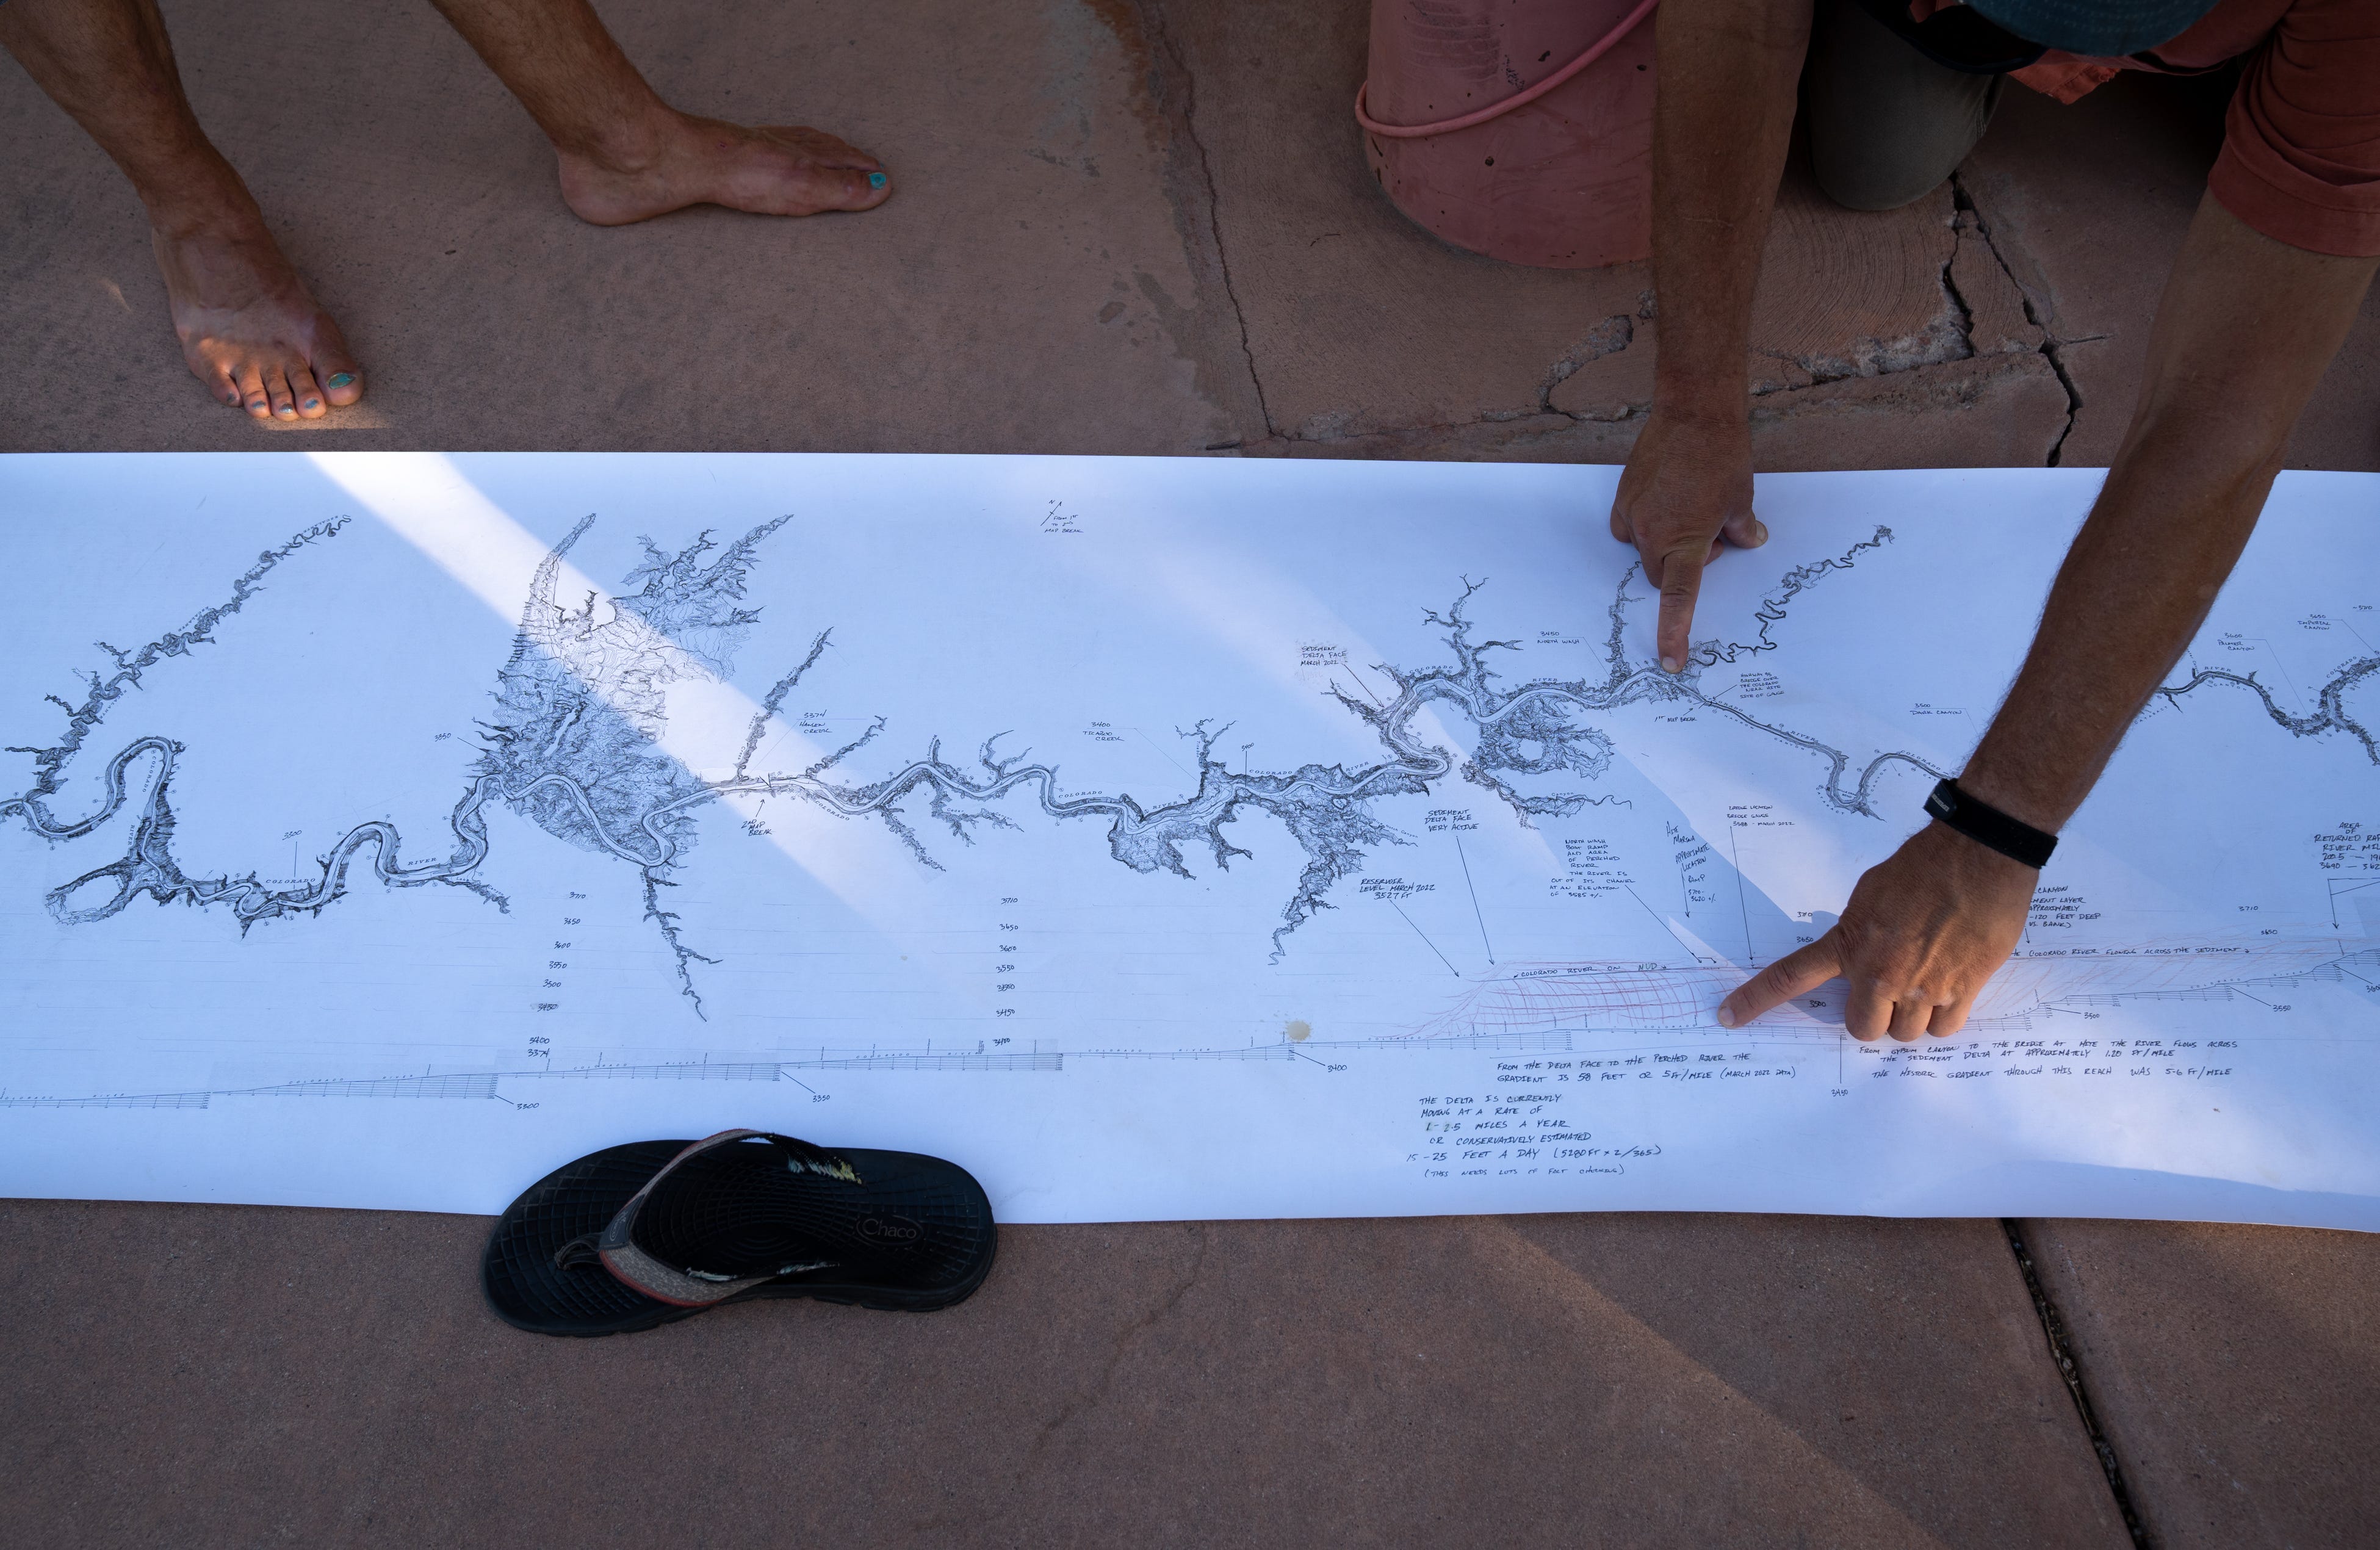 Mike DeHoff (right), with the Returning Rapids Project, points out the sediment delta on a map of the Colorado River at Swanny City Park in Moab, Utah, on June 10, 2022,